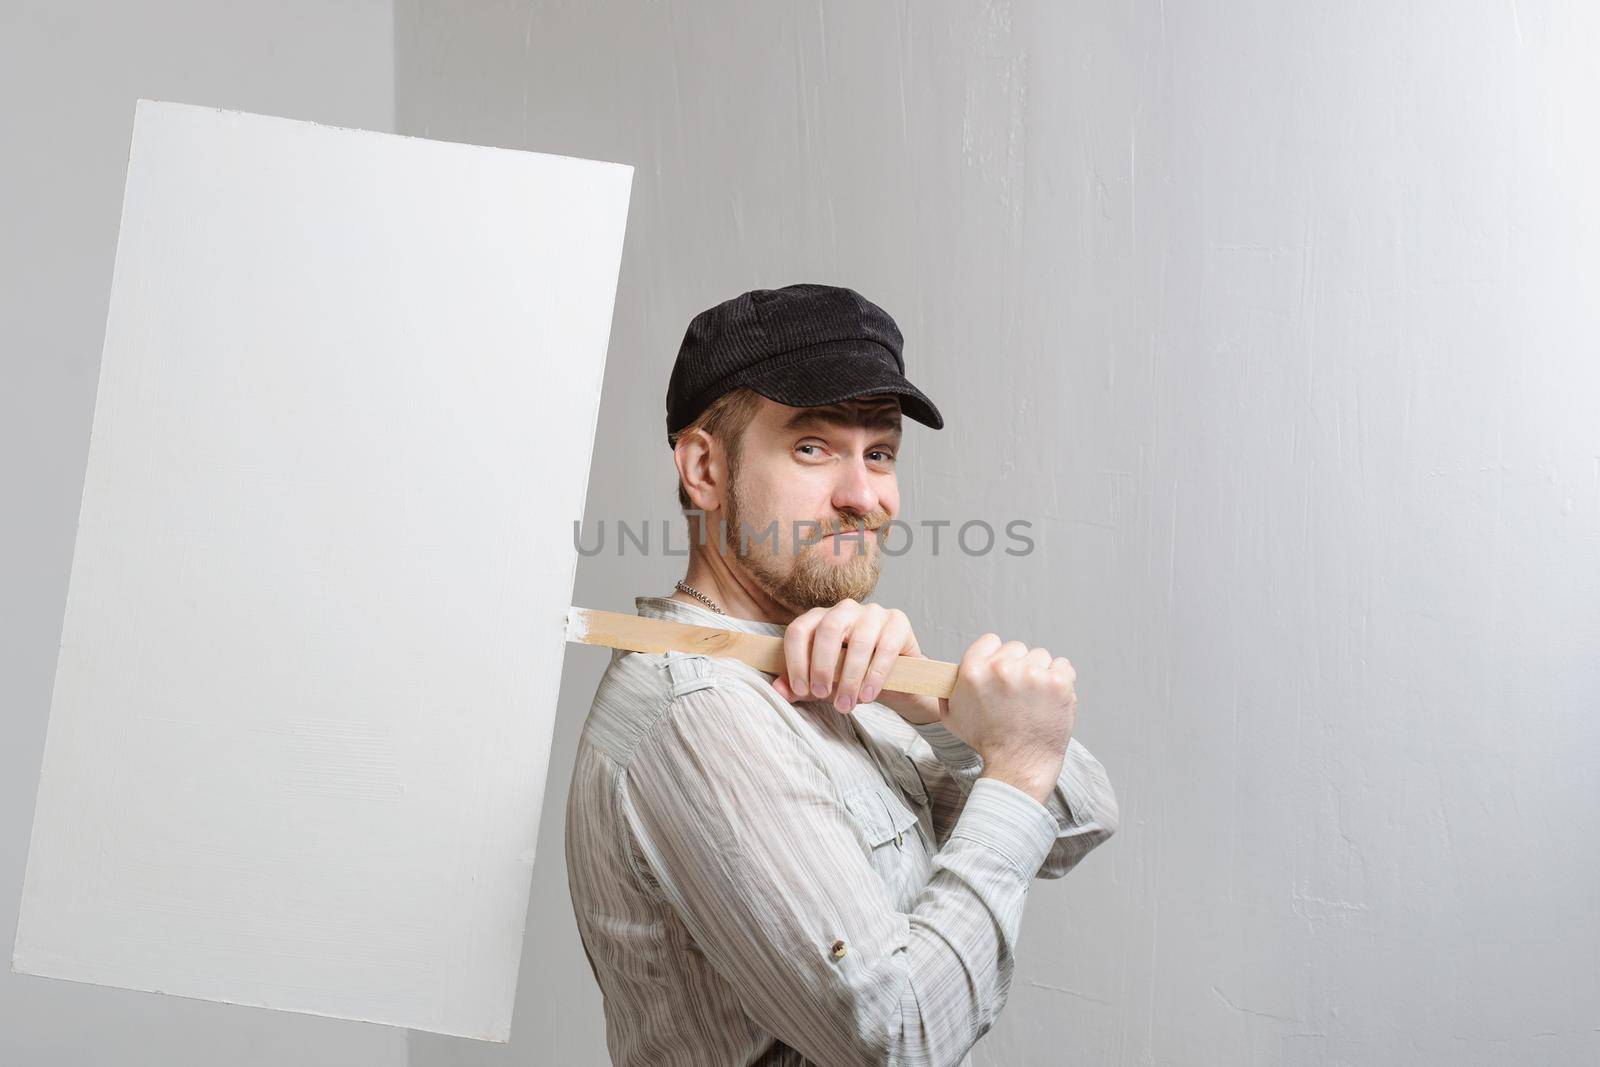 Working in a cap holding a banner over his head at white wall